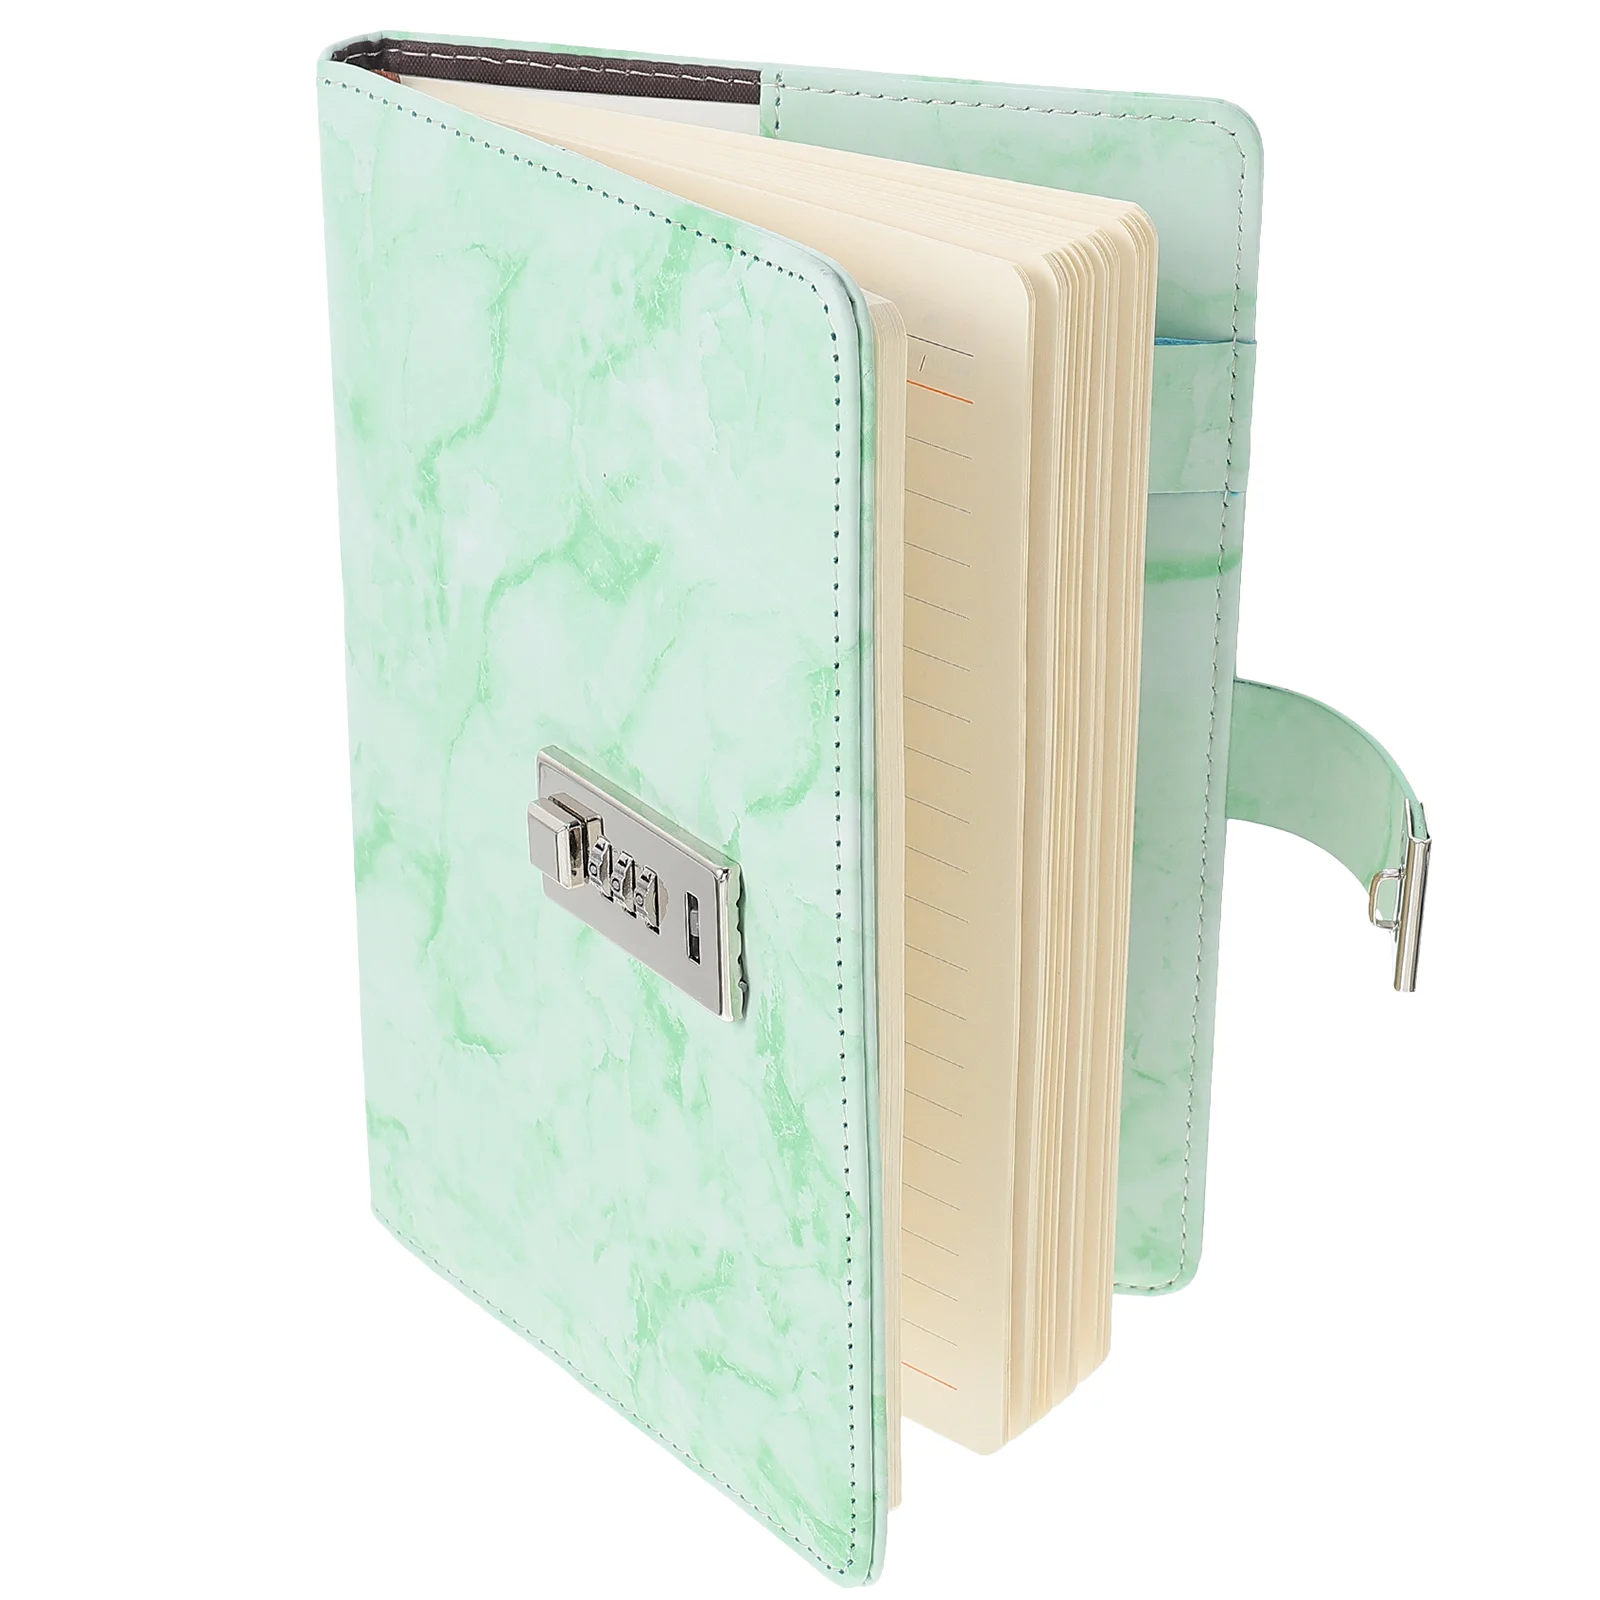 

Lock Journal Bound Diary Secret Notebook Plain Paper Office Record Accessory Lined